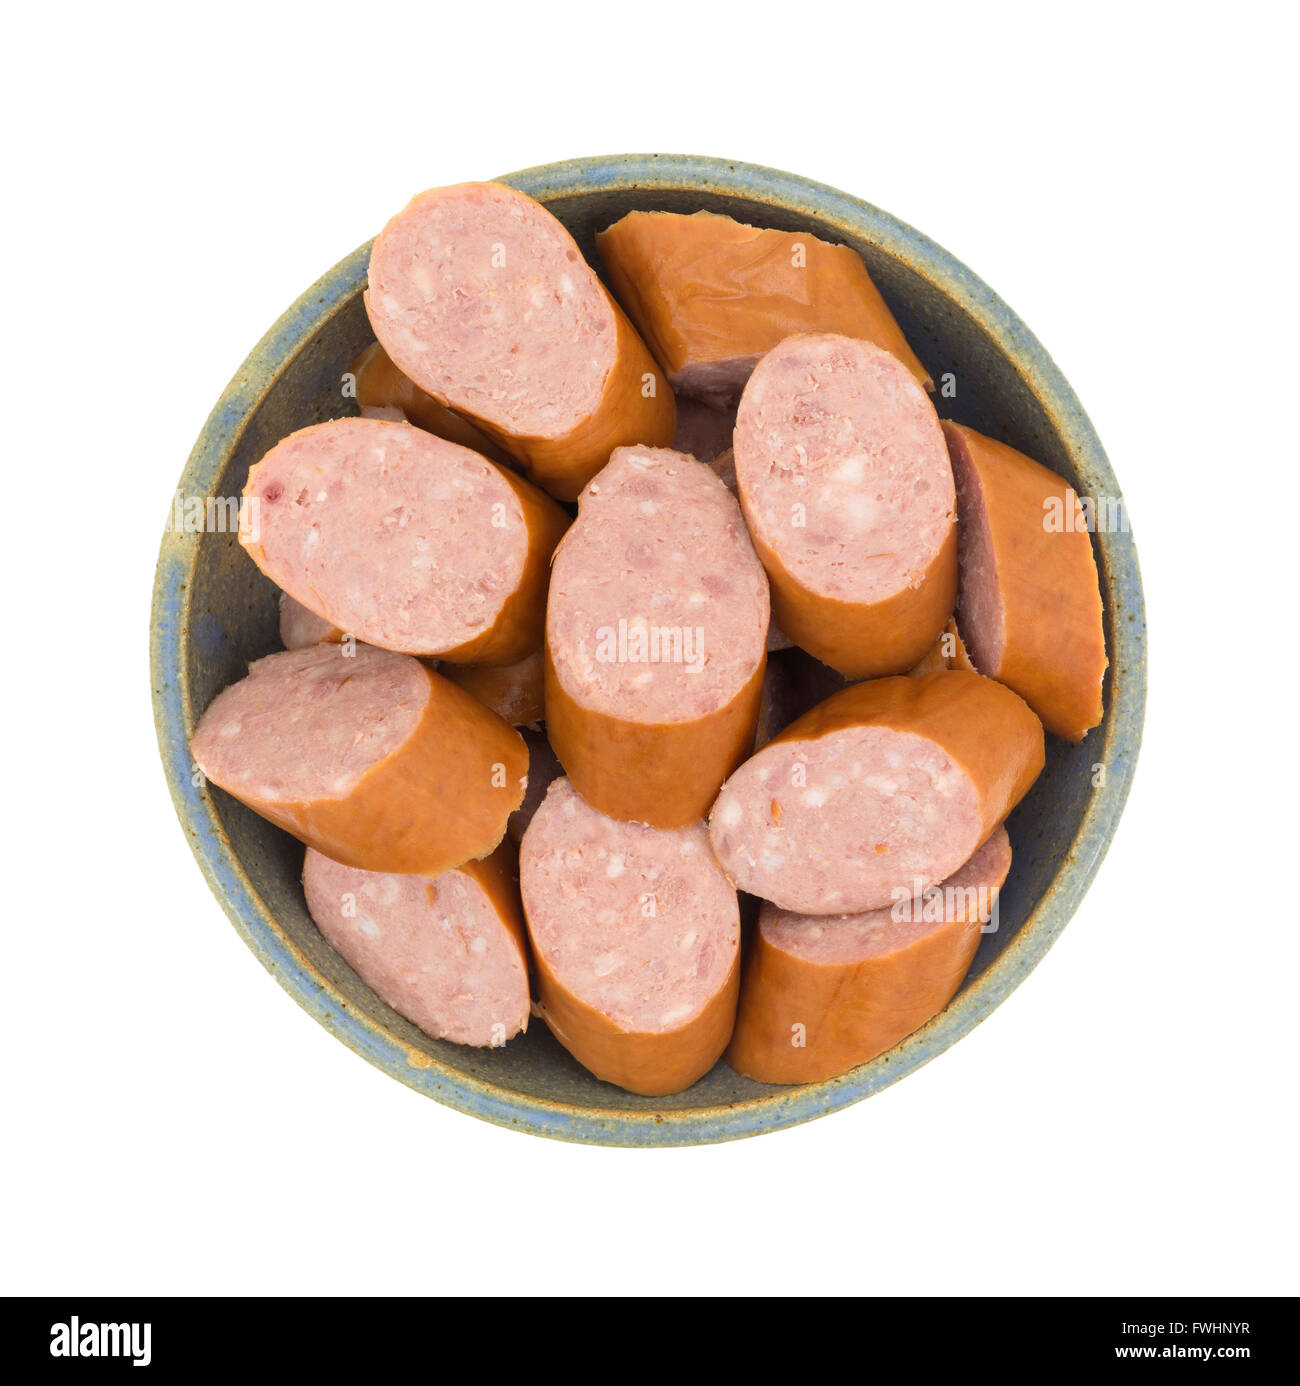 Top view of several slices of reduced calorie kielbasa sausage in an old stoneware bowl isolated on a white background. Stock Photo